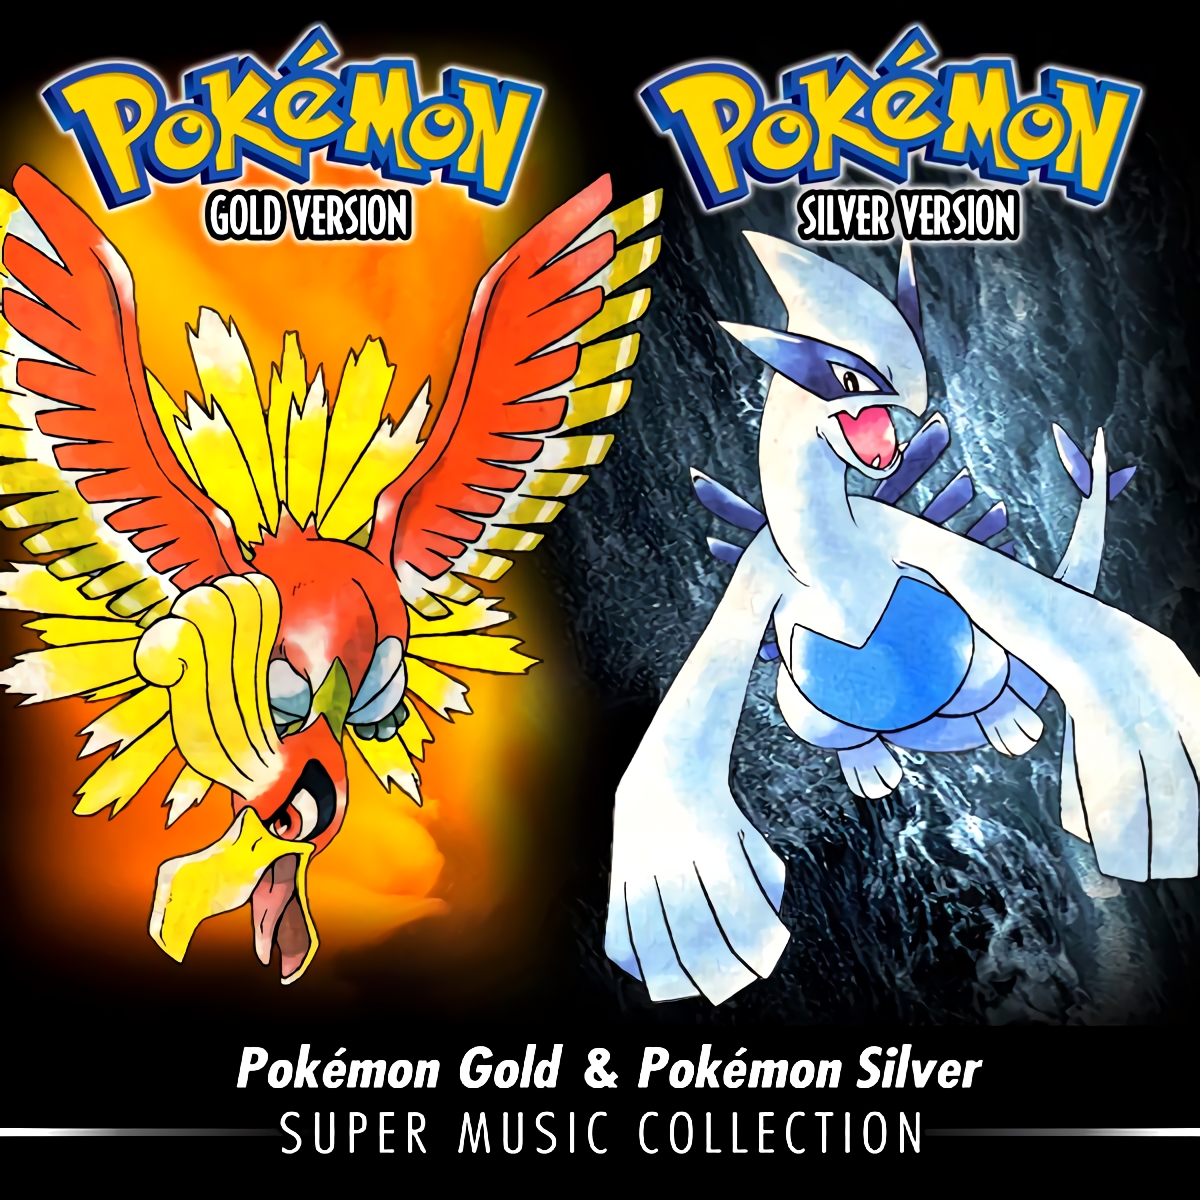 Pokémon Heart Gold Version (USA) : GameFreak : Free Download, Borrow, and  Streaming : Internet Archive